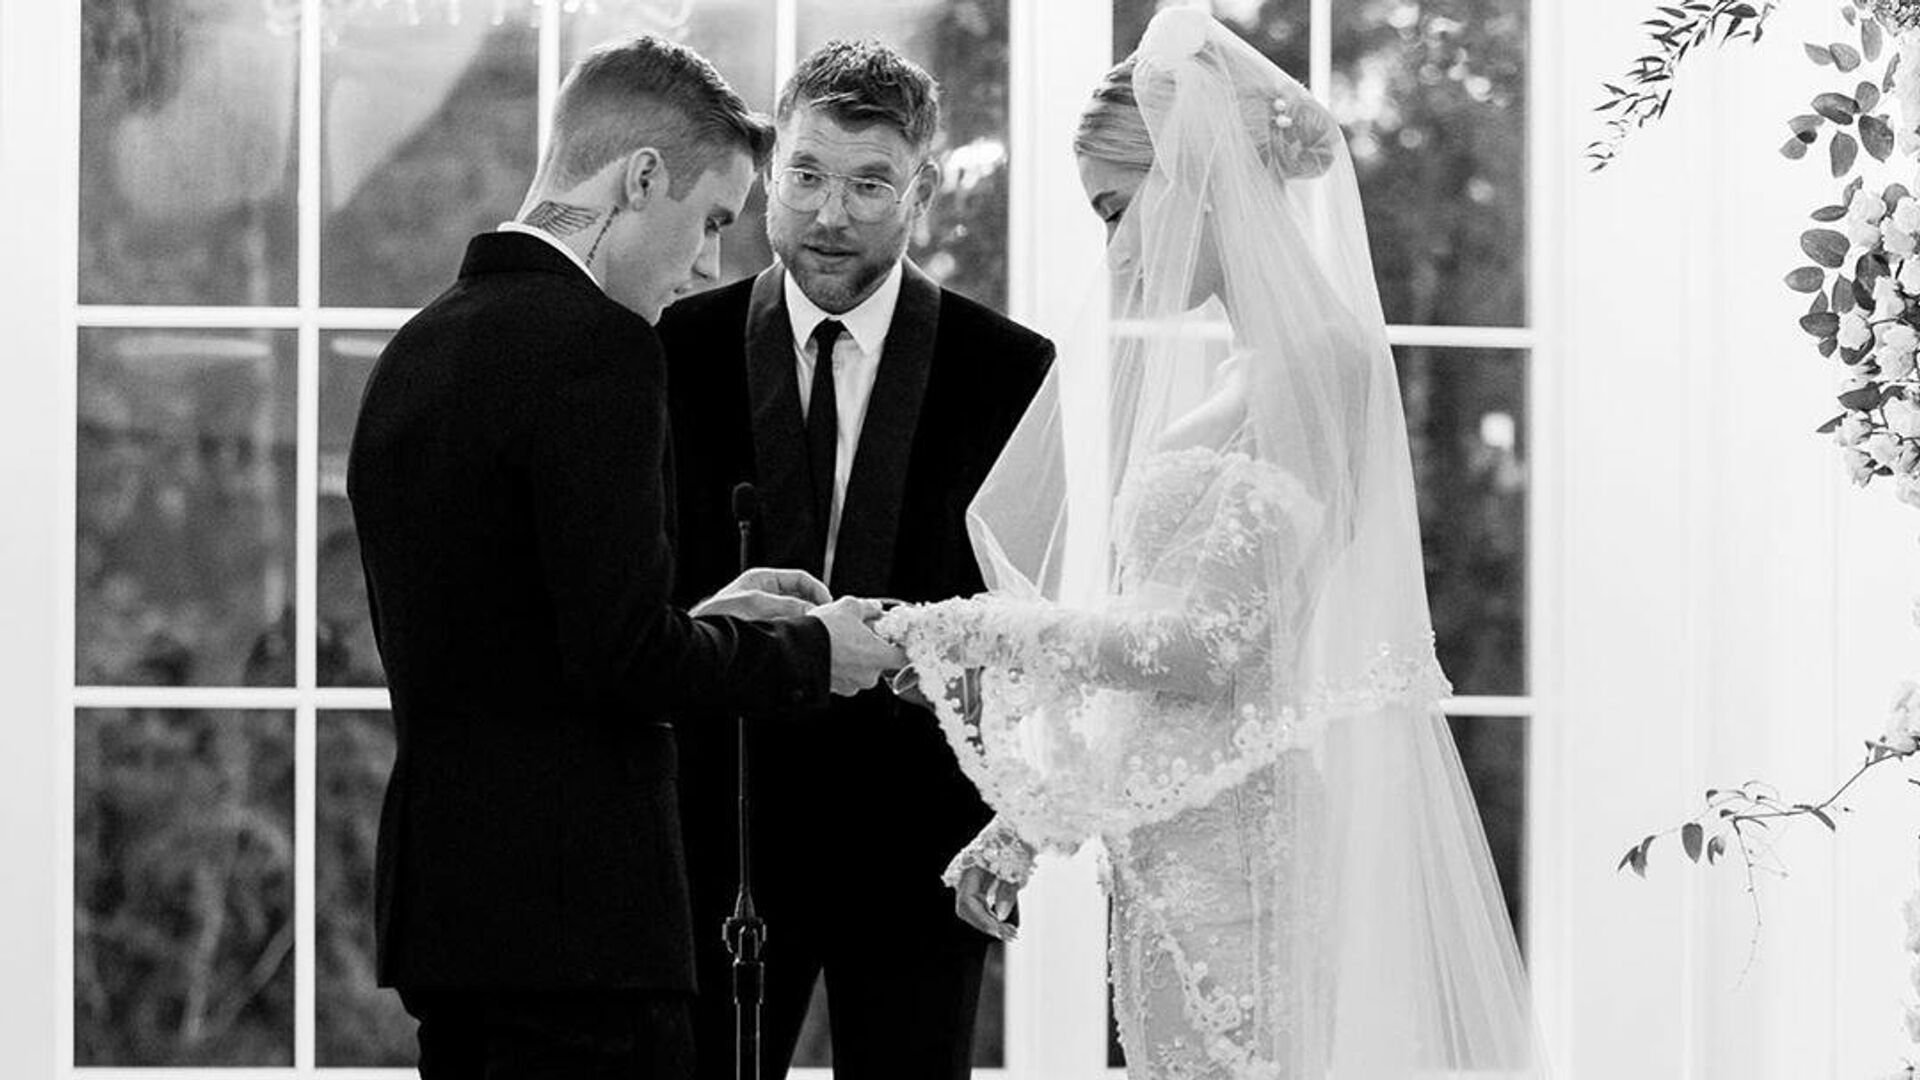 The Wedding of Justin and Hailey